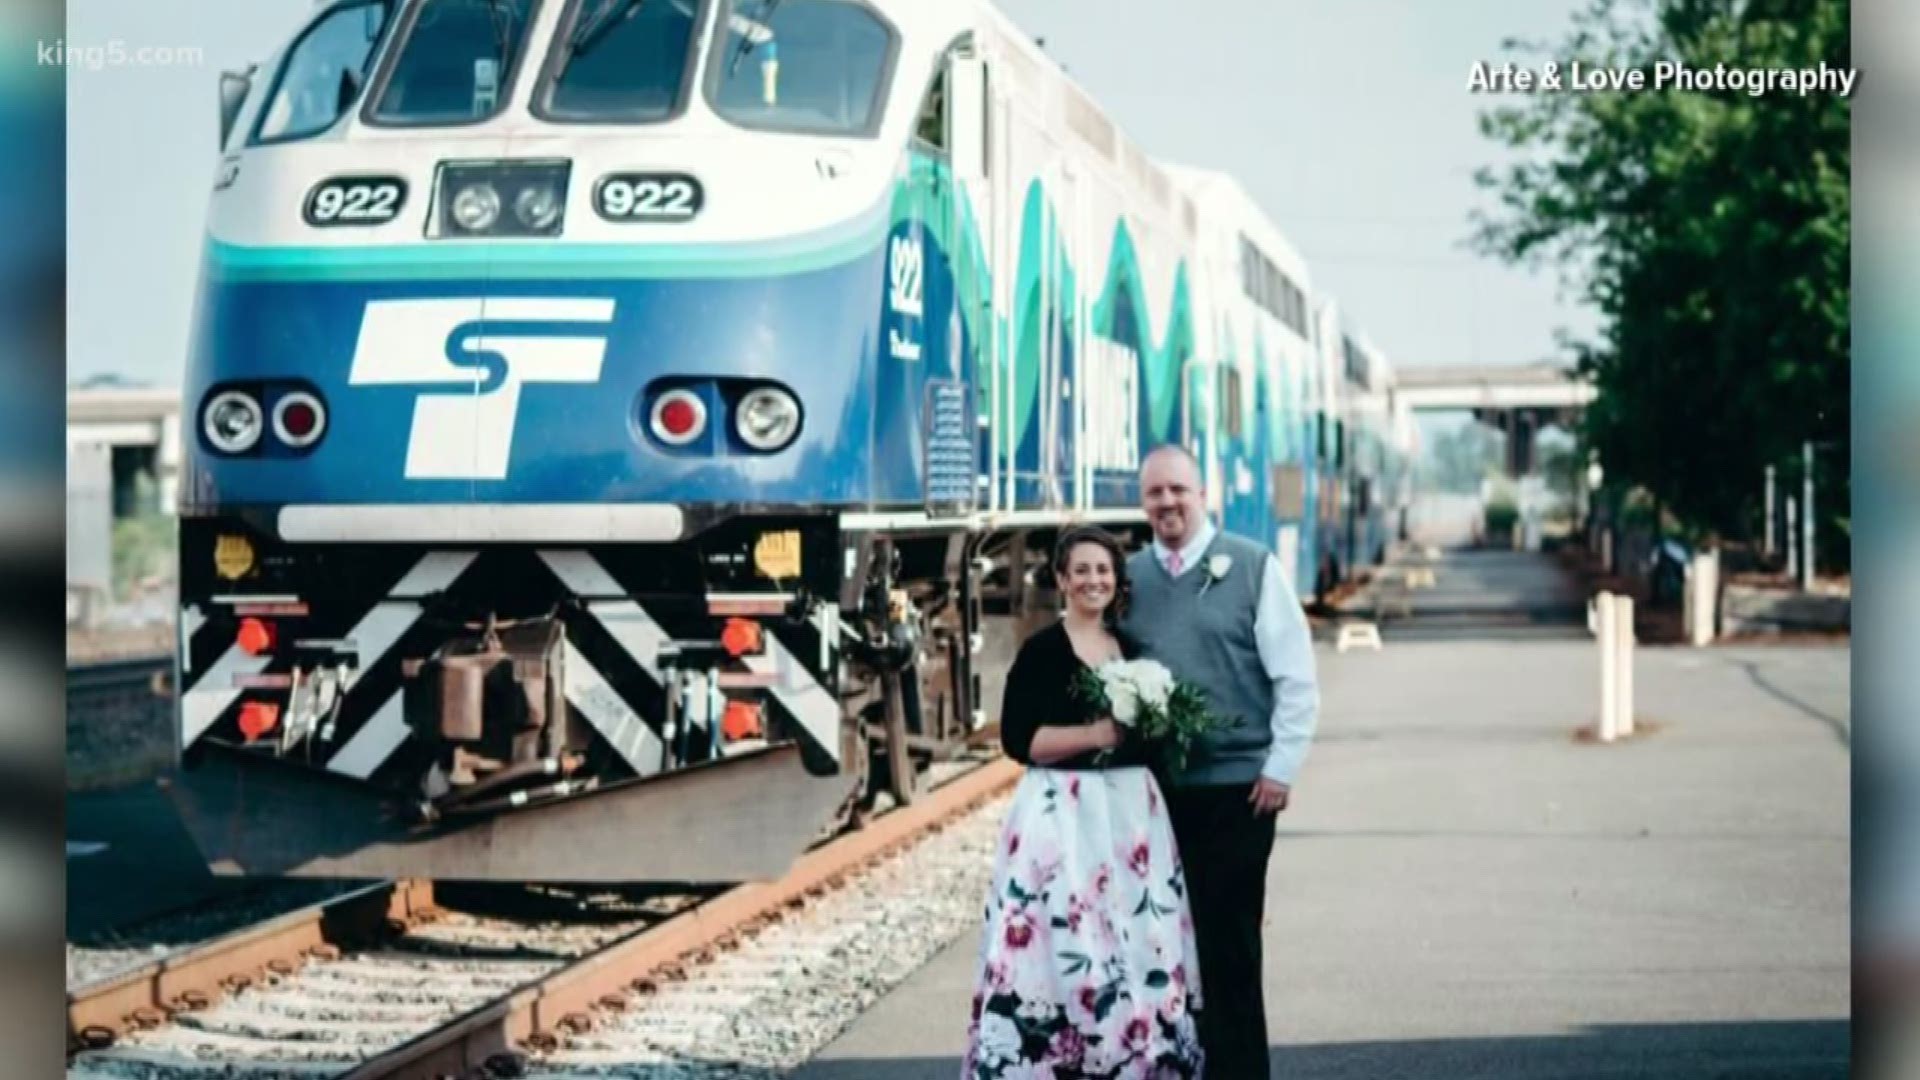 Congratulations to Lauren Balisky and Jason Miller! They were actually set up by fellow commuters who rode the train with them each morning from Everett to Seattle. A judge, also a regular on the train, officiated the ceremony. The photos were taken by "Arte & Love photography". Thanks to Ann Simpson for sharing the story!